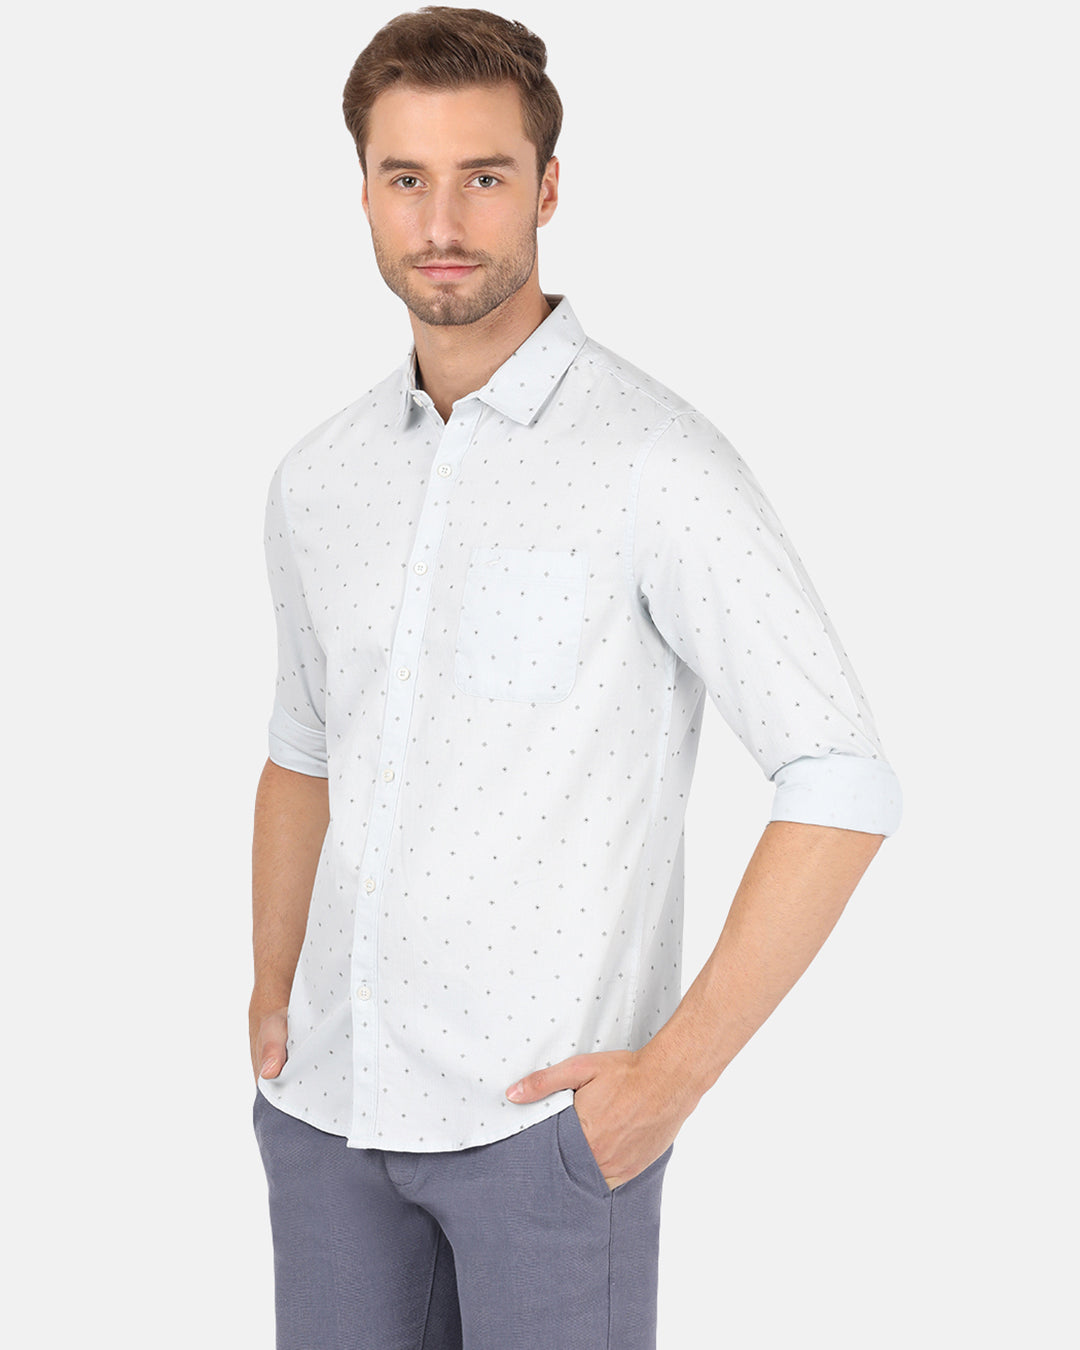 Crocodile Casual Full Sleeve Comfort Fit Printed Light Grey with Collar Shirt for Men